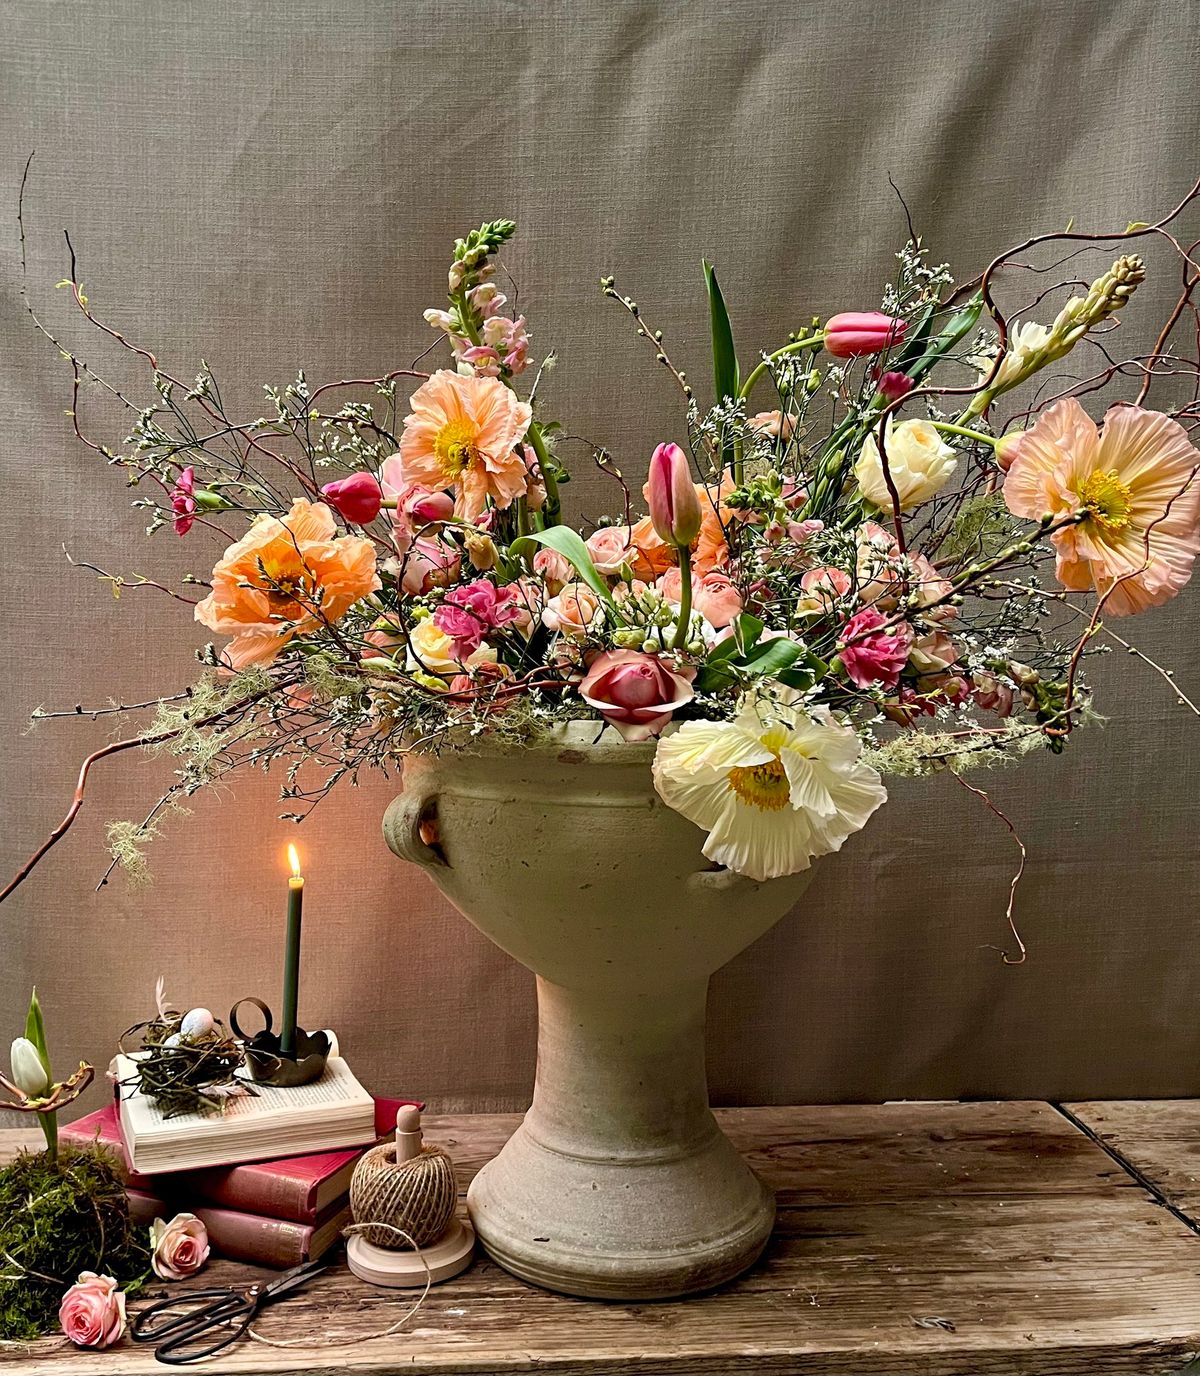 Dutch Masters Inspired Large Scale Statement Urn & Photo Staging Workshop: Friday, July 19th 10-4pm